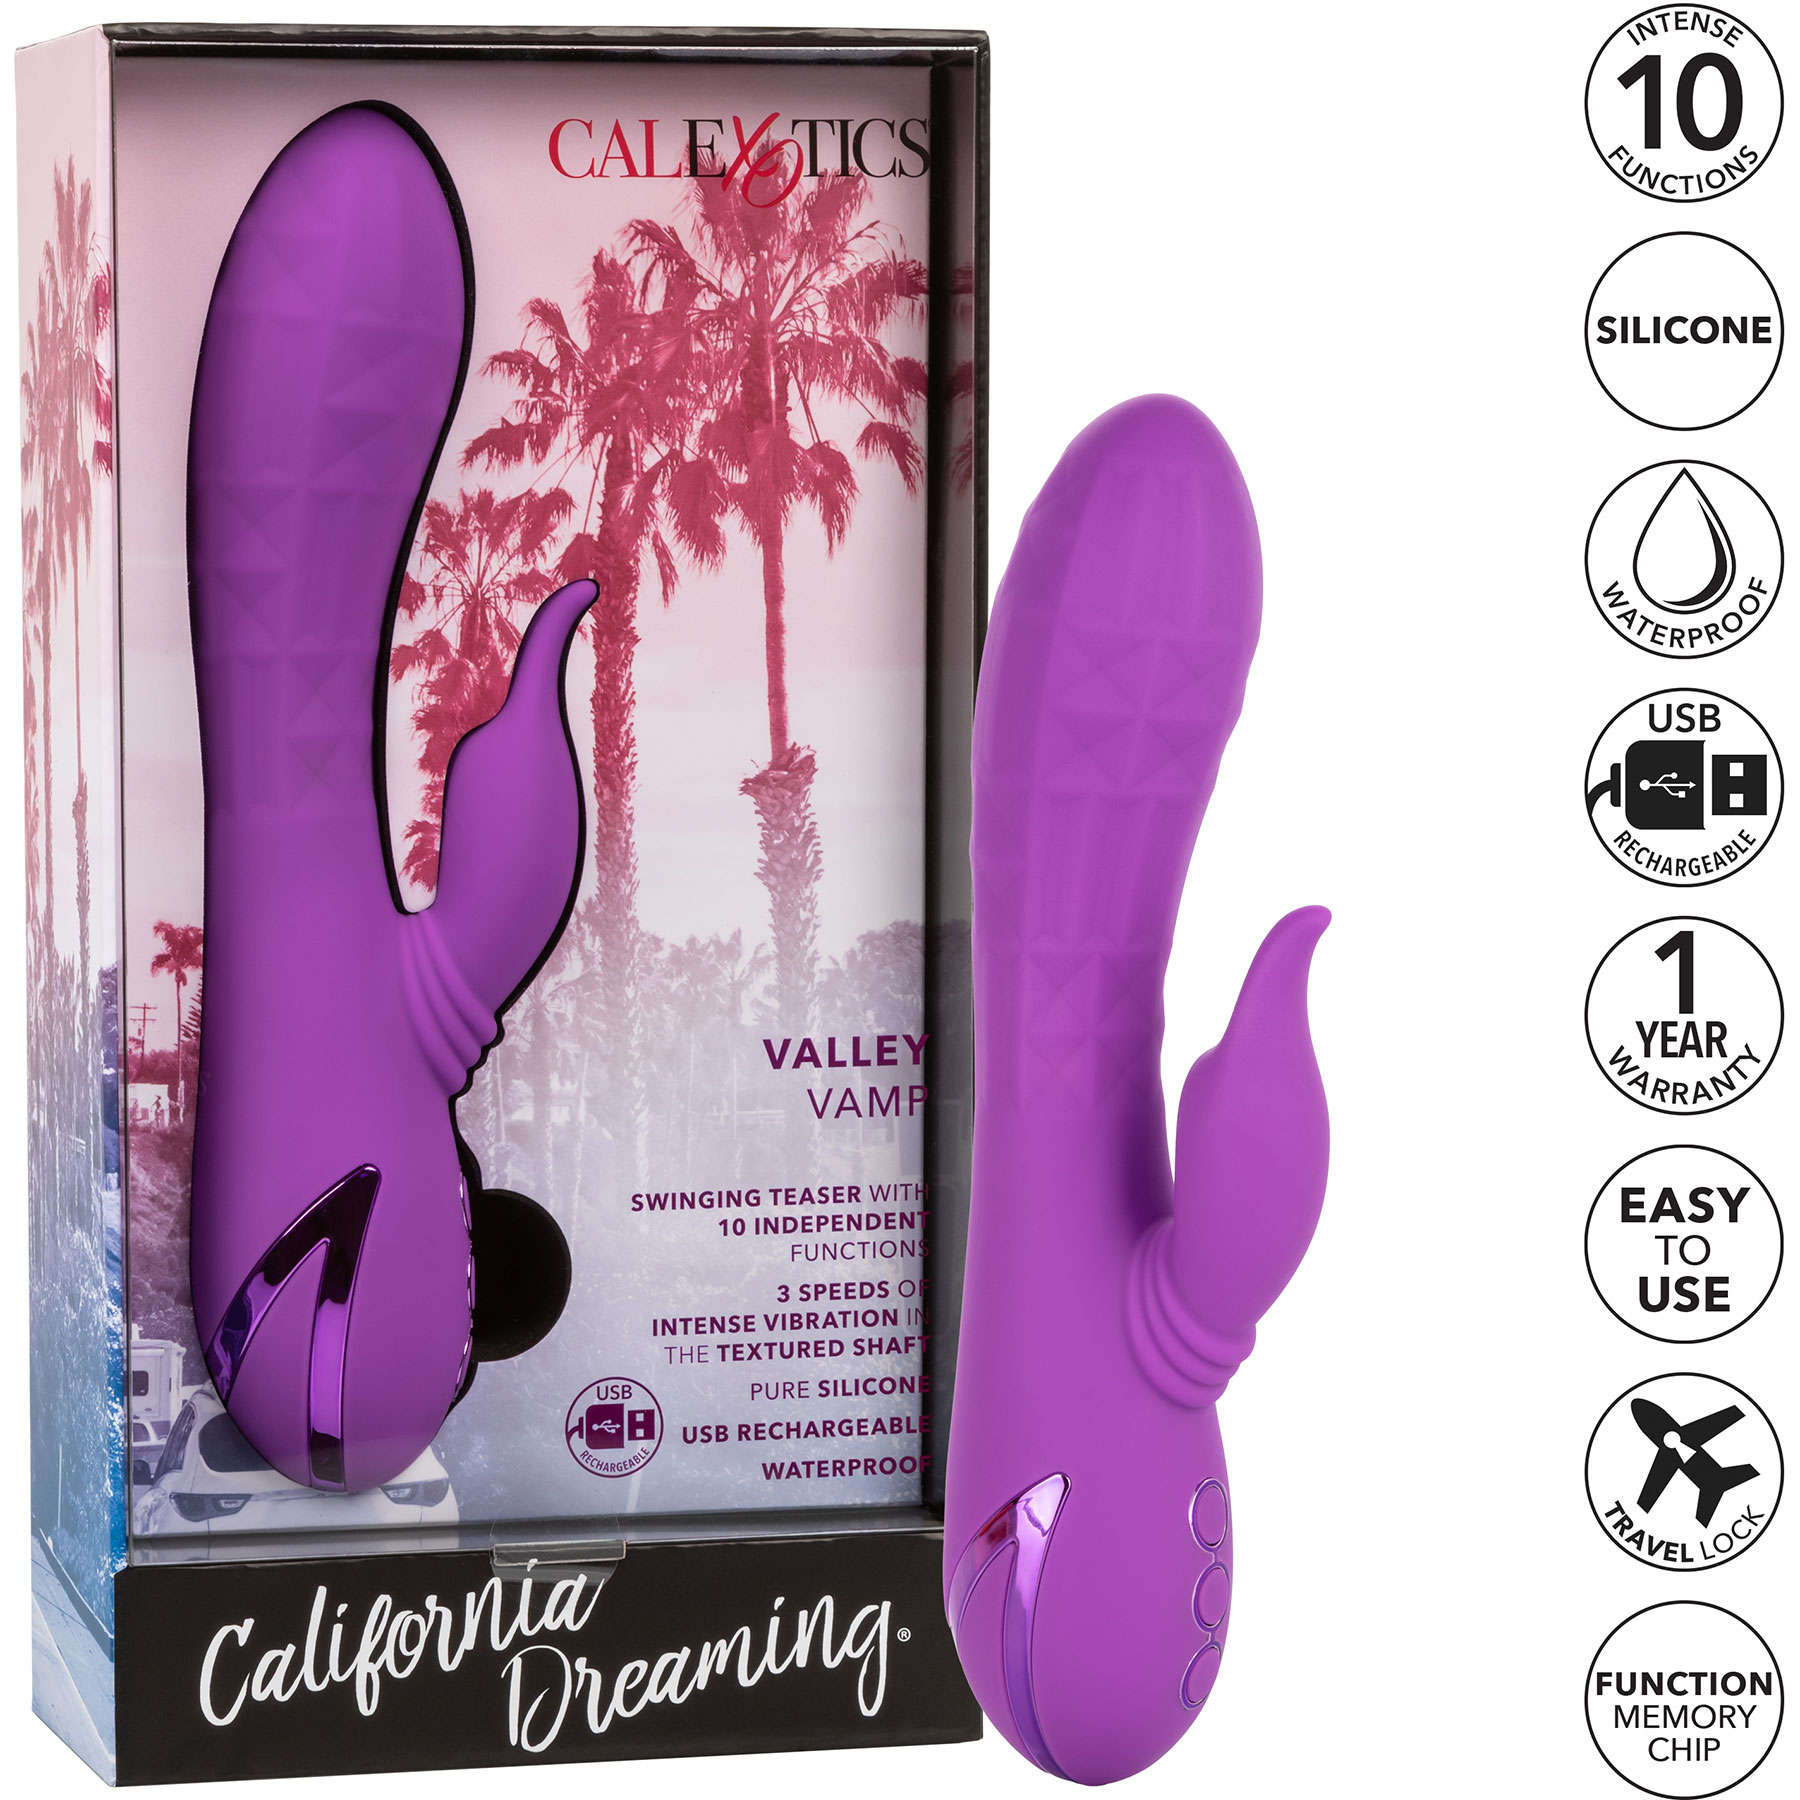 California Dreaming Valley Vamp Rabbit Style Silicone Vibrator - Features